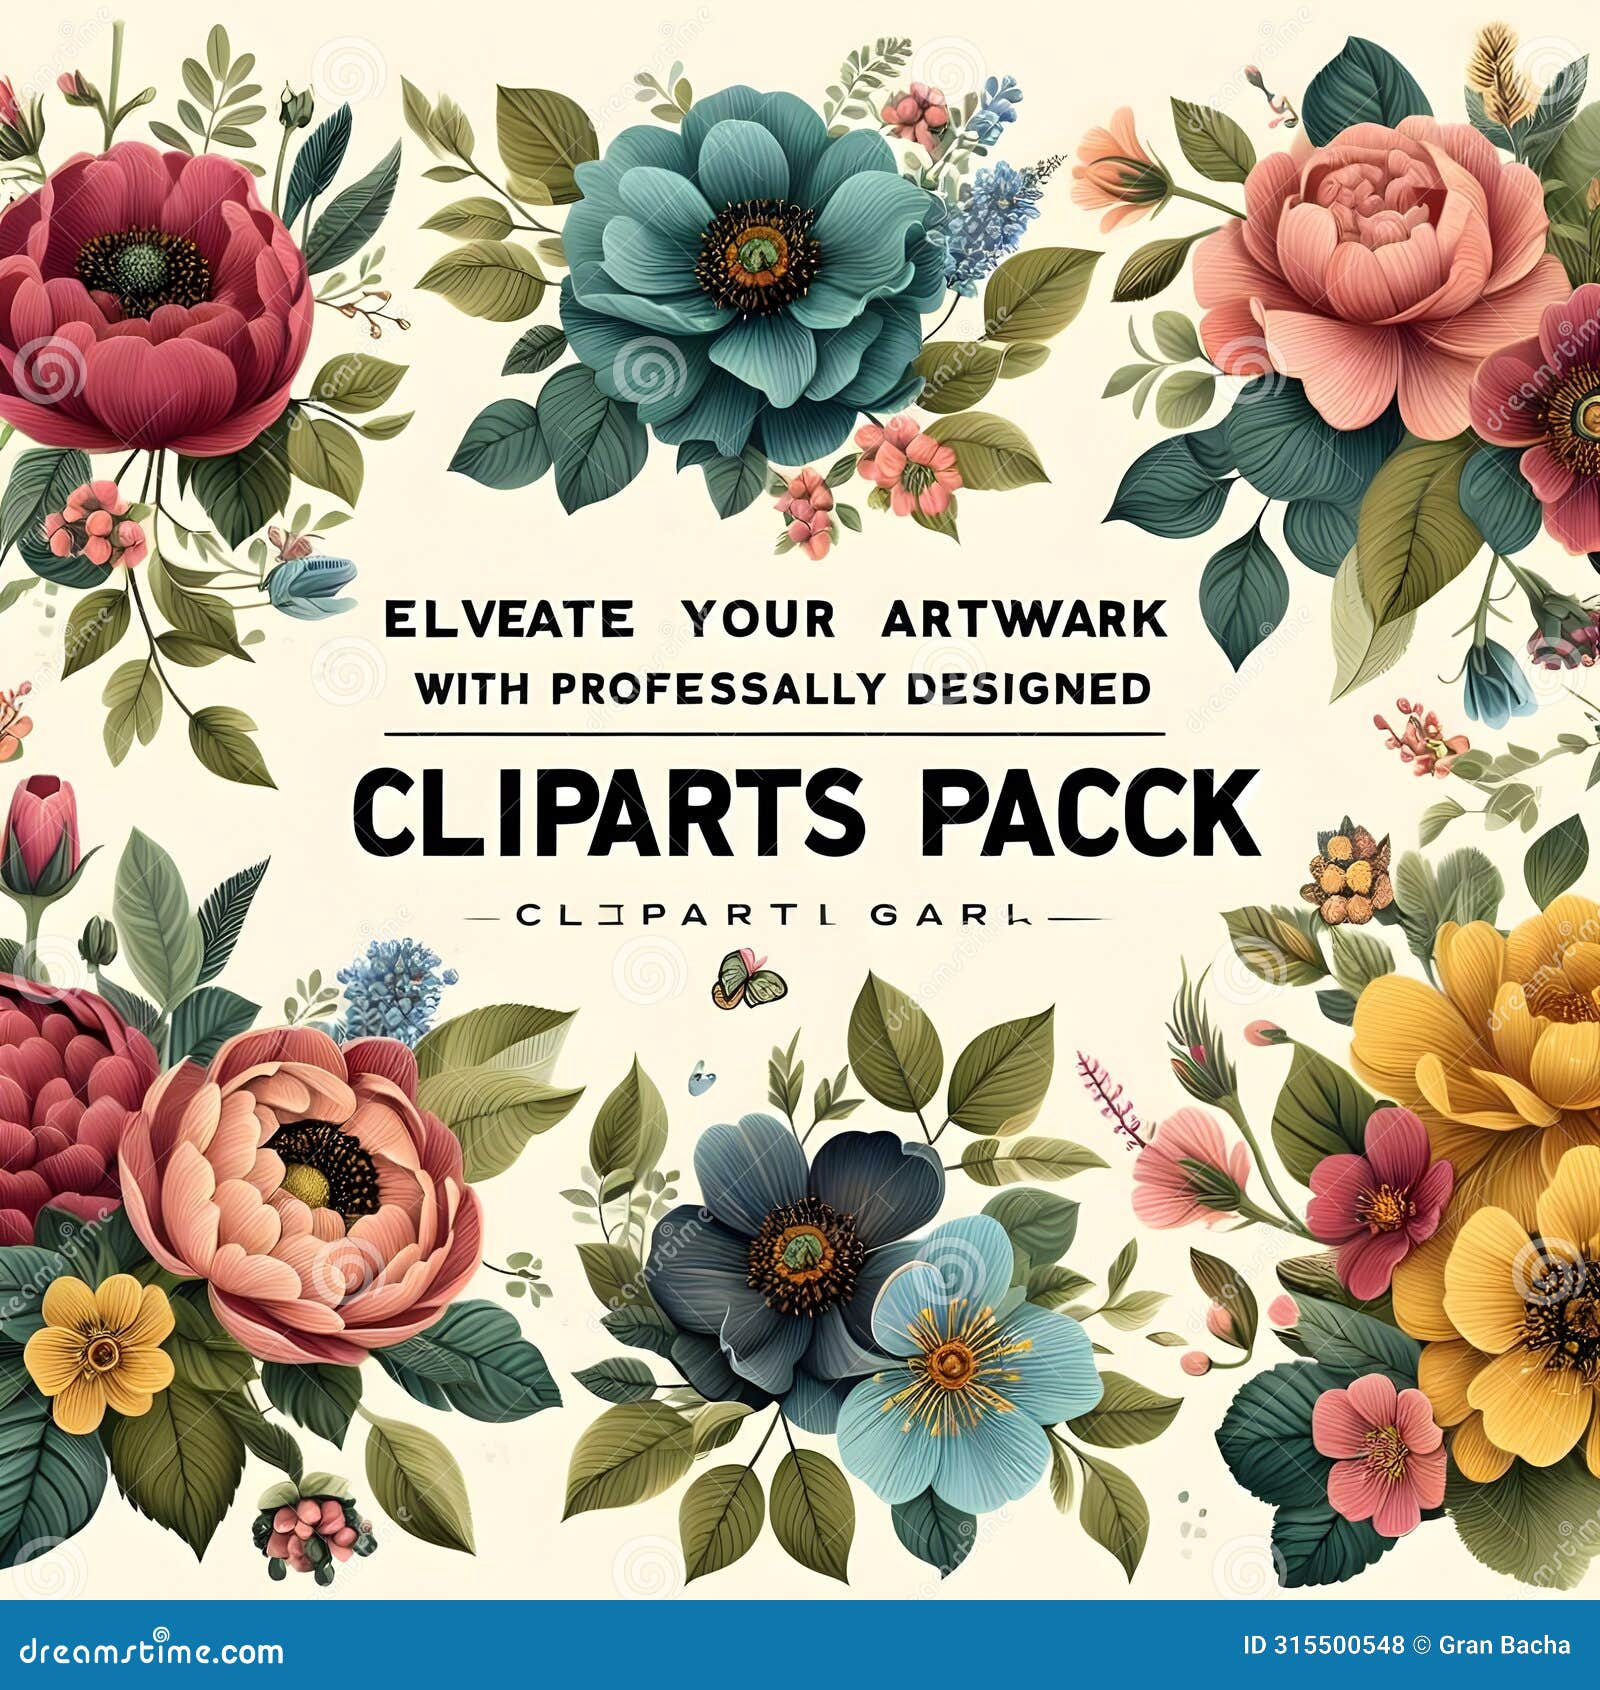 elevate your artwork with professionally ed floral cliparts packs